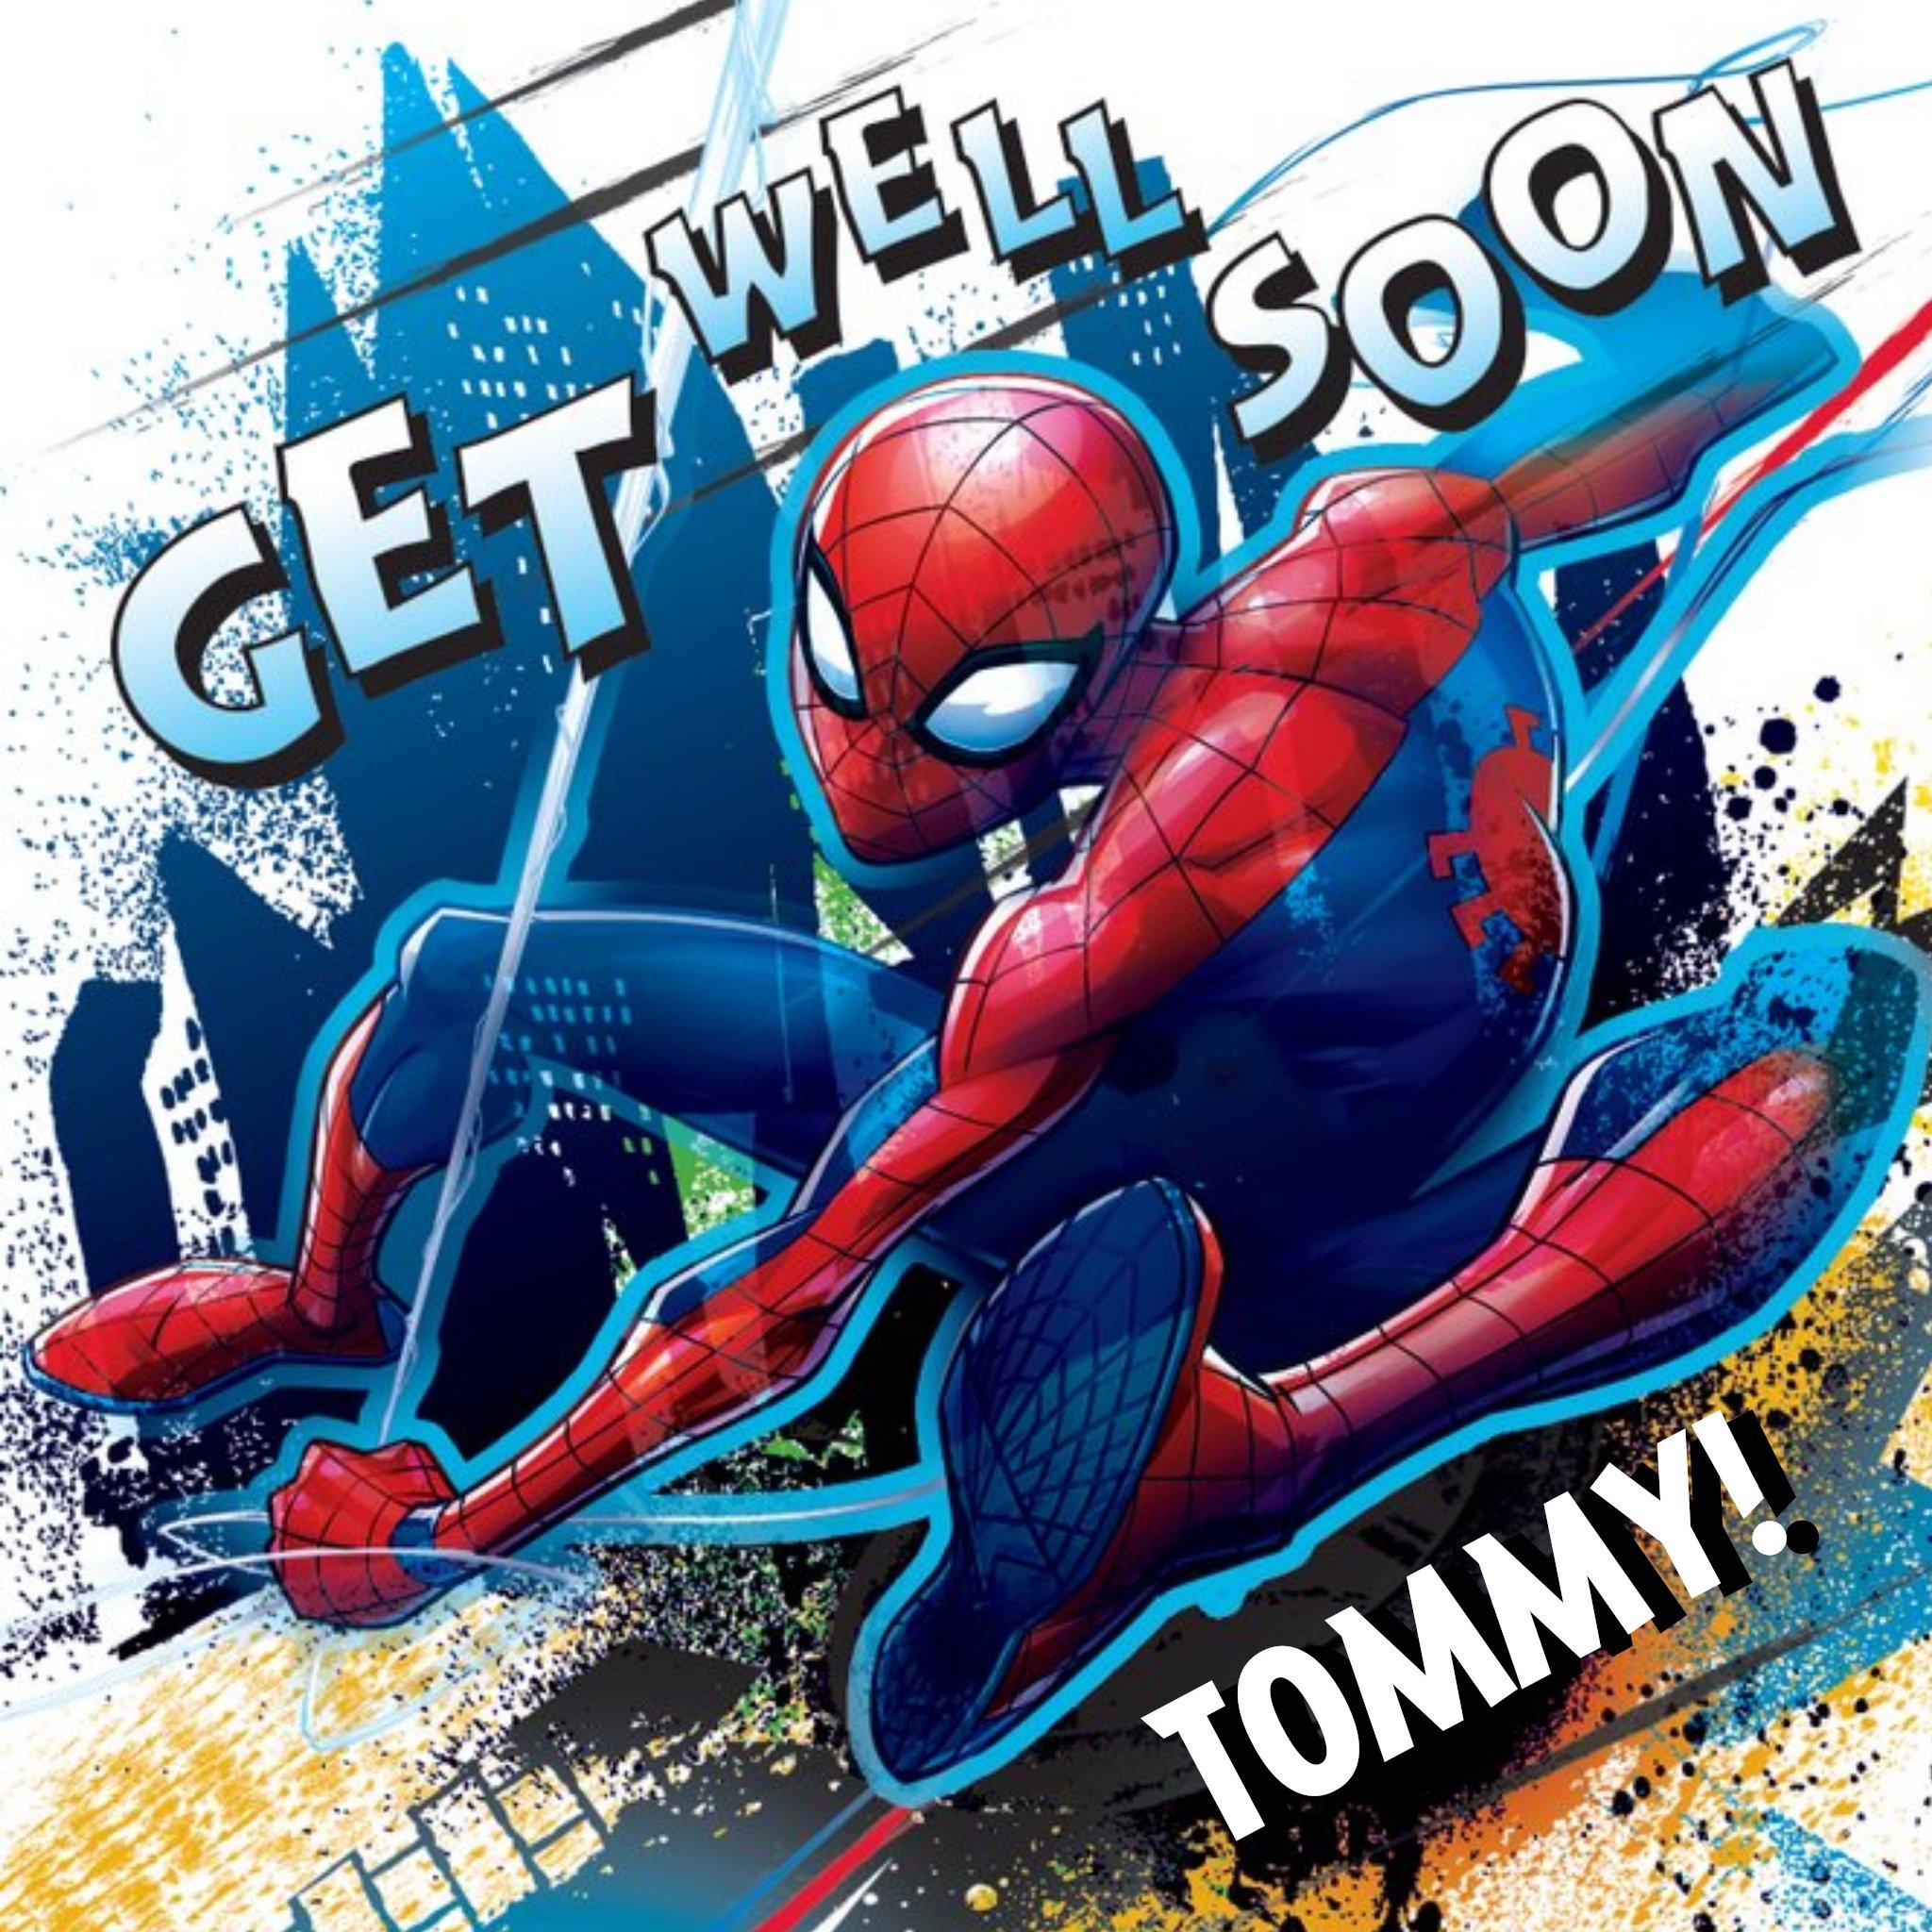 Marvel Spiderman Personalised Get Well Soon Card, Square